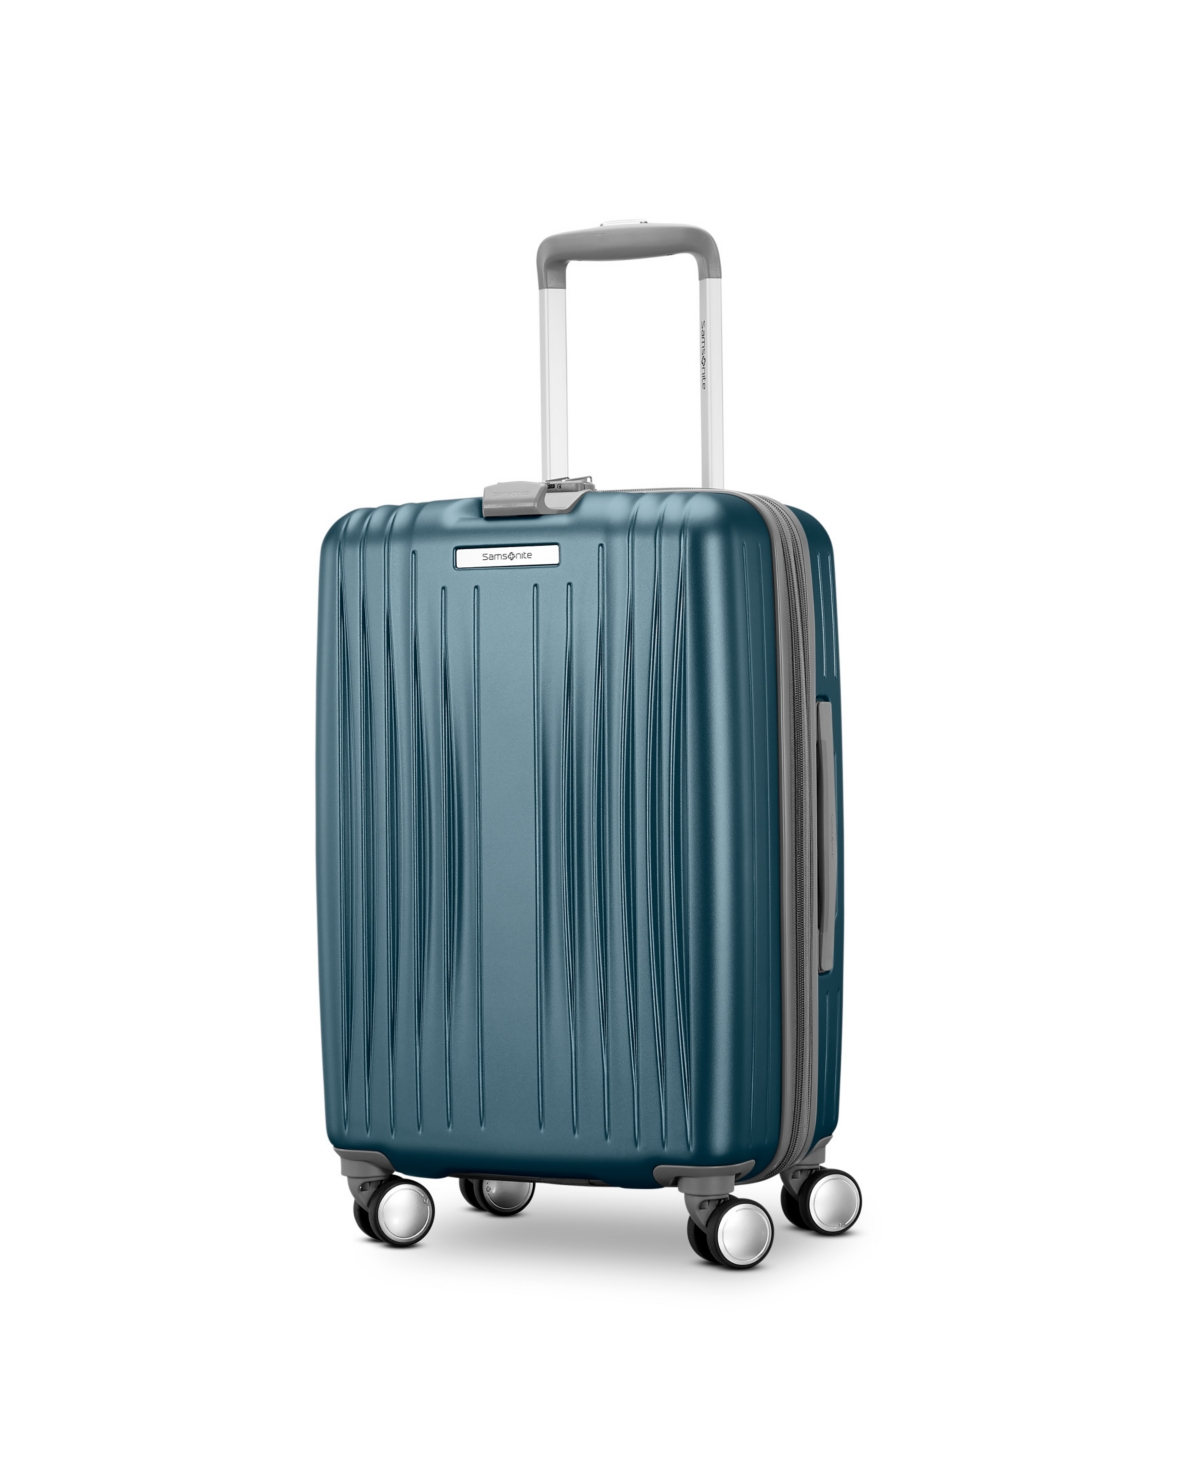 Samsonite Opto 3 Carry-on Spinner In Frost Teal